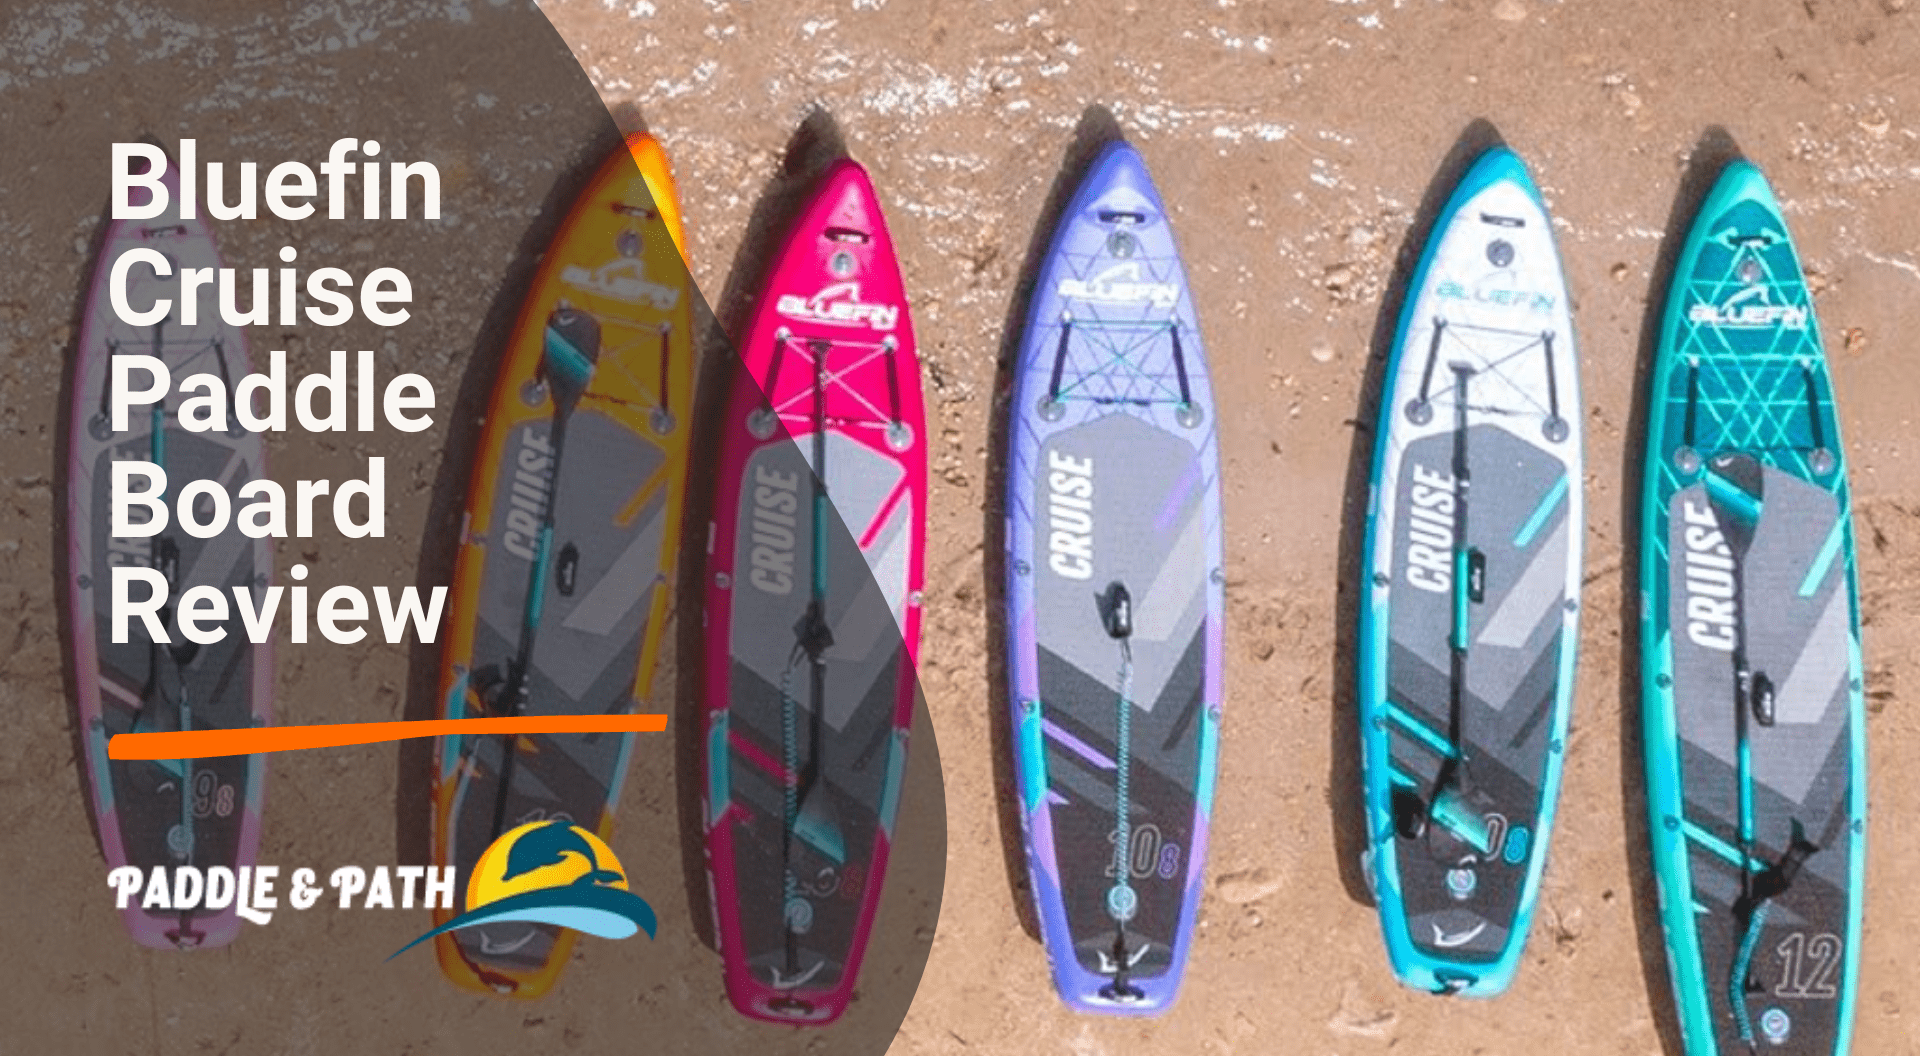 Bluefin Cruise Paddle Board Review